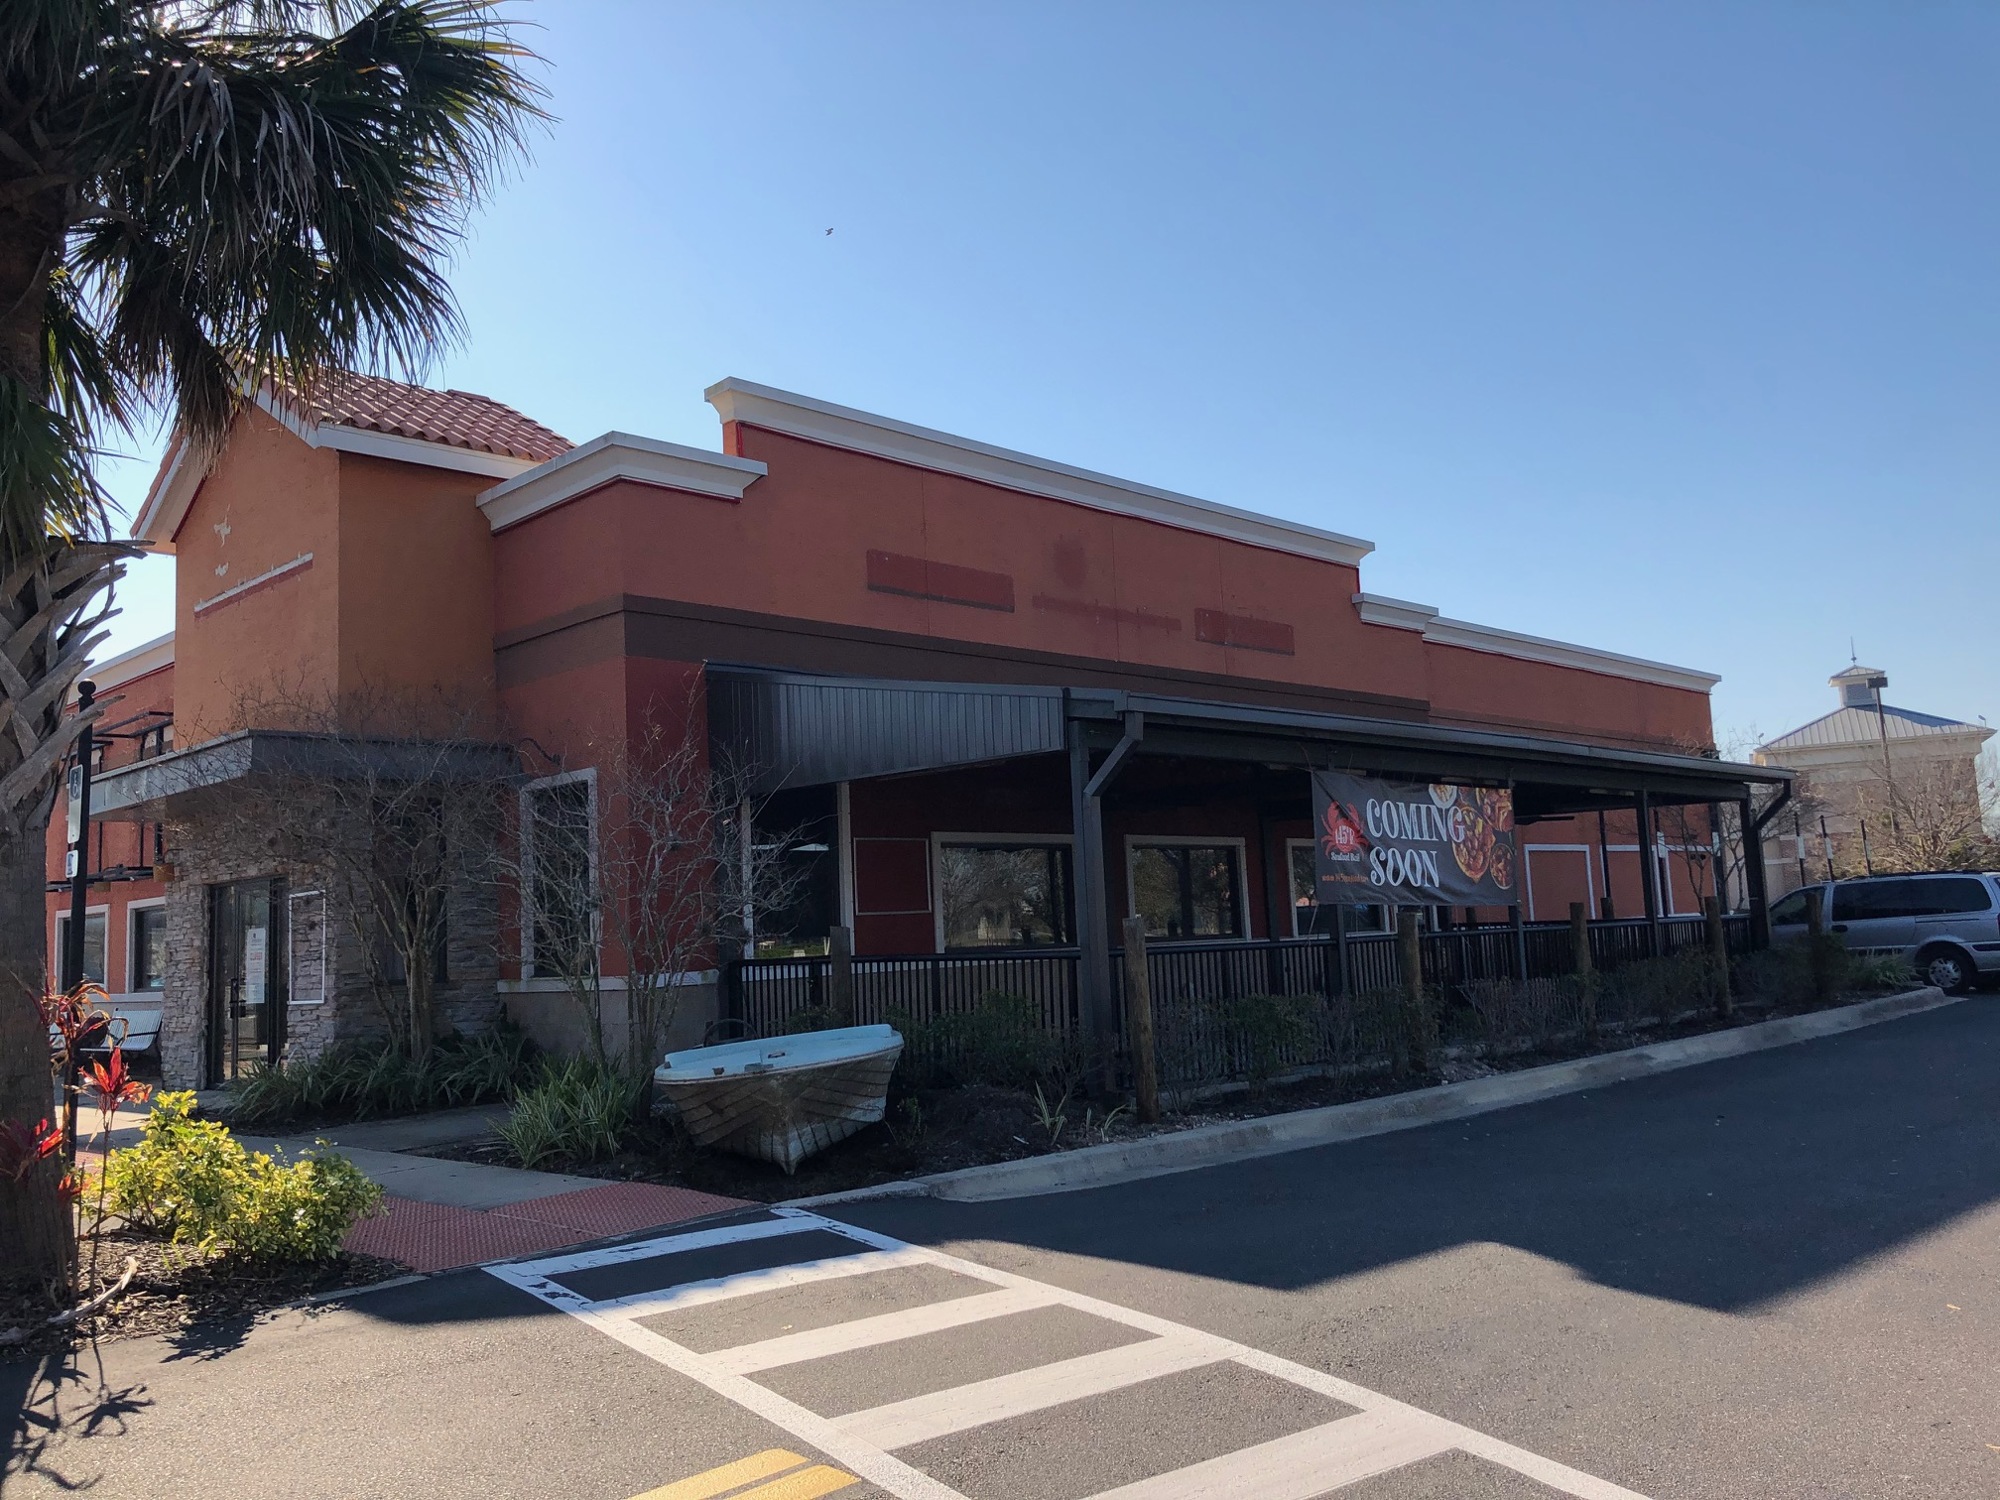 The restaurant is in St. John’s Town Center North anchored by Publix and Total Wine & More.